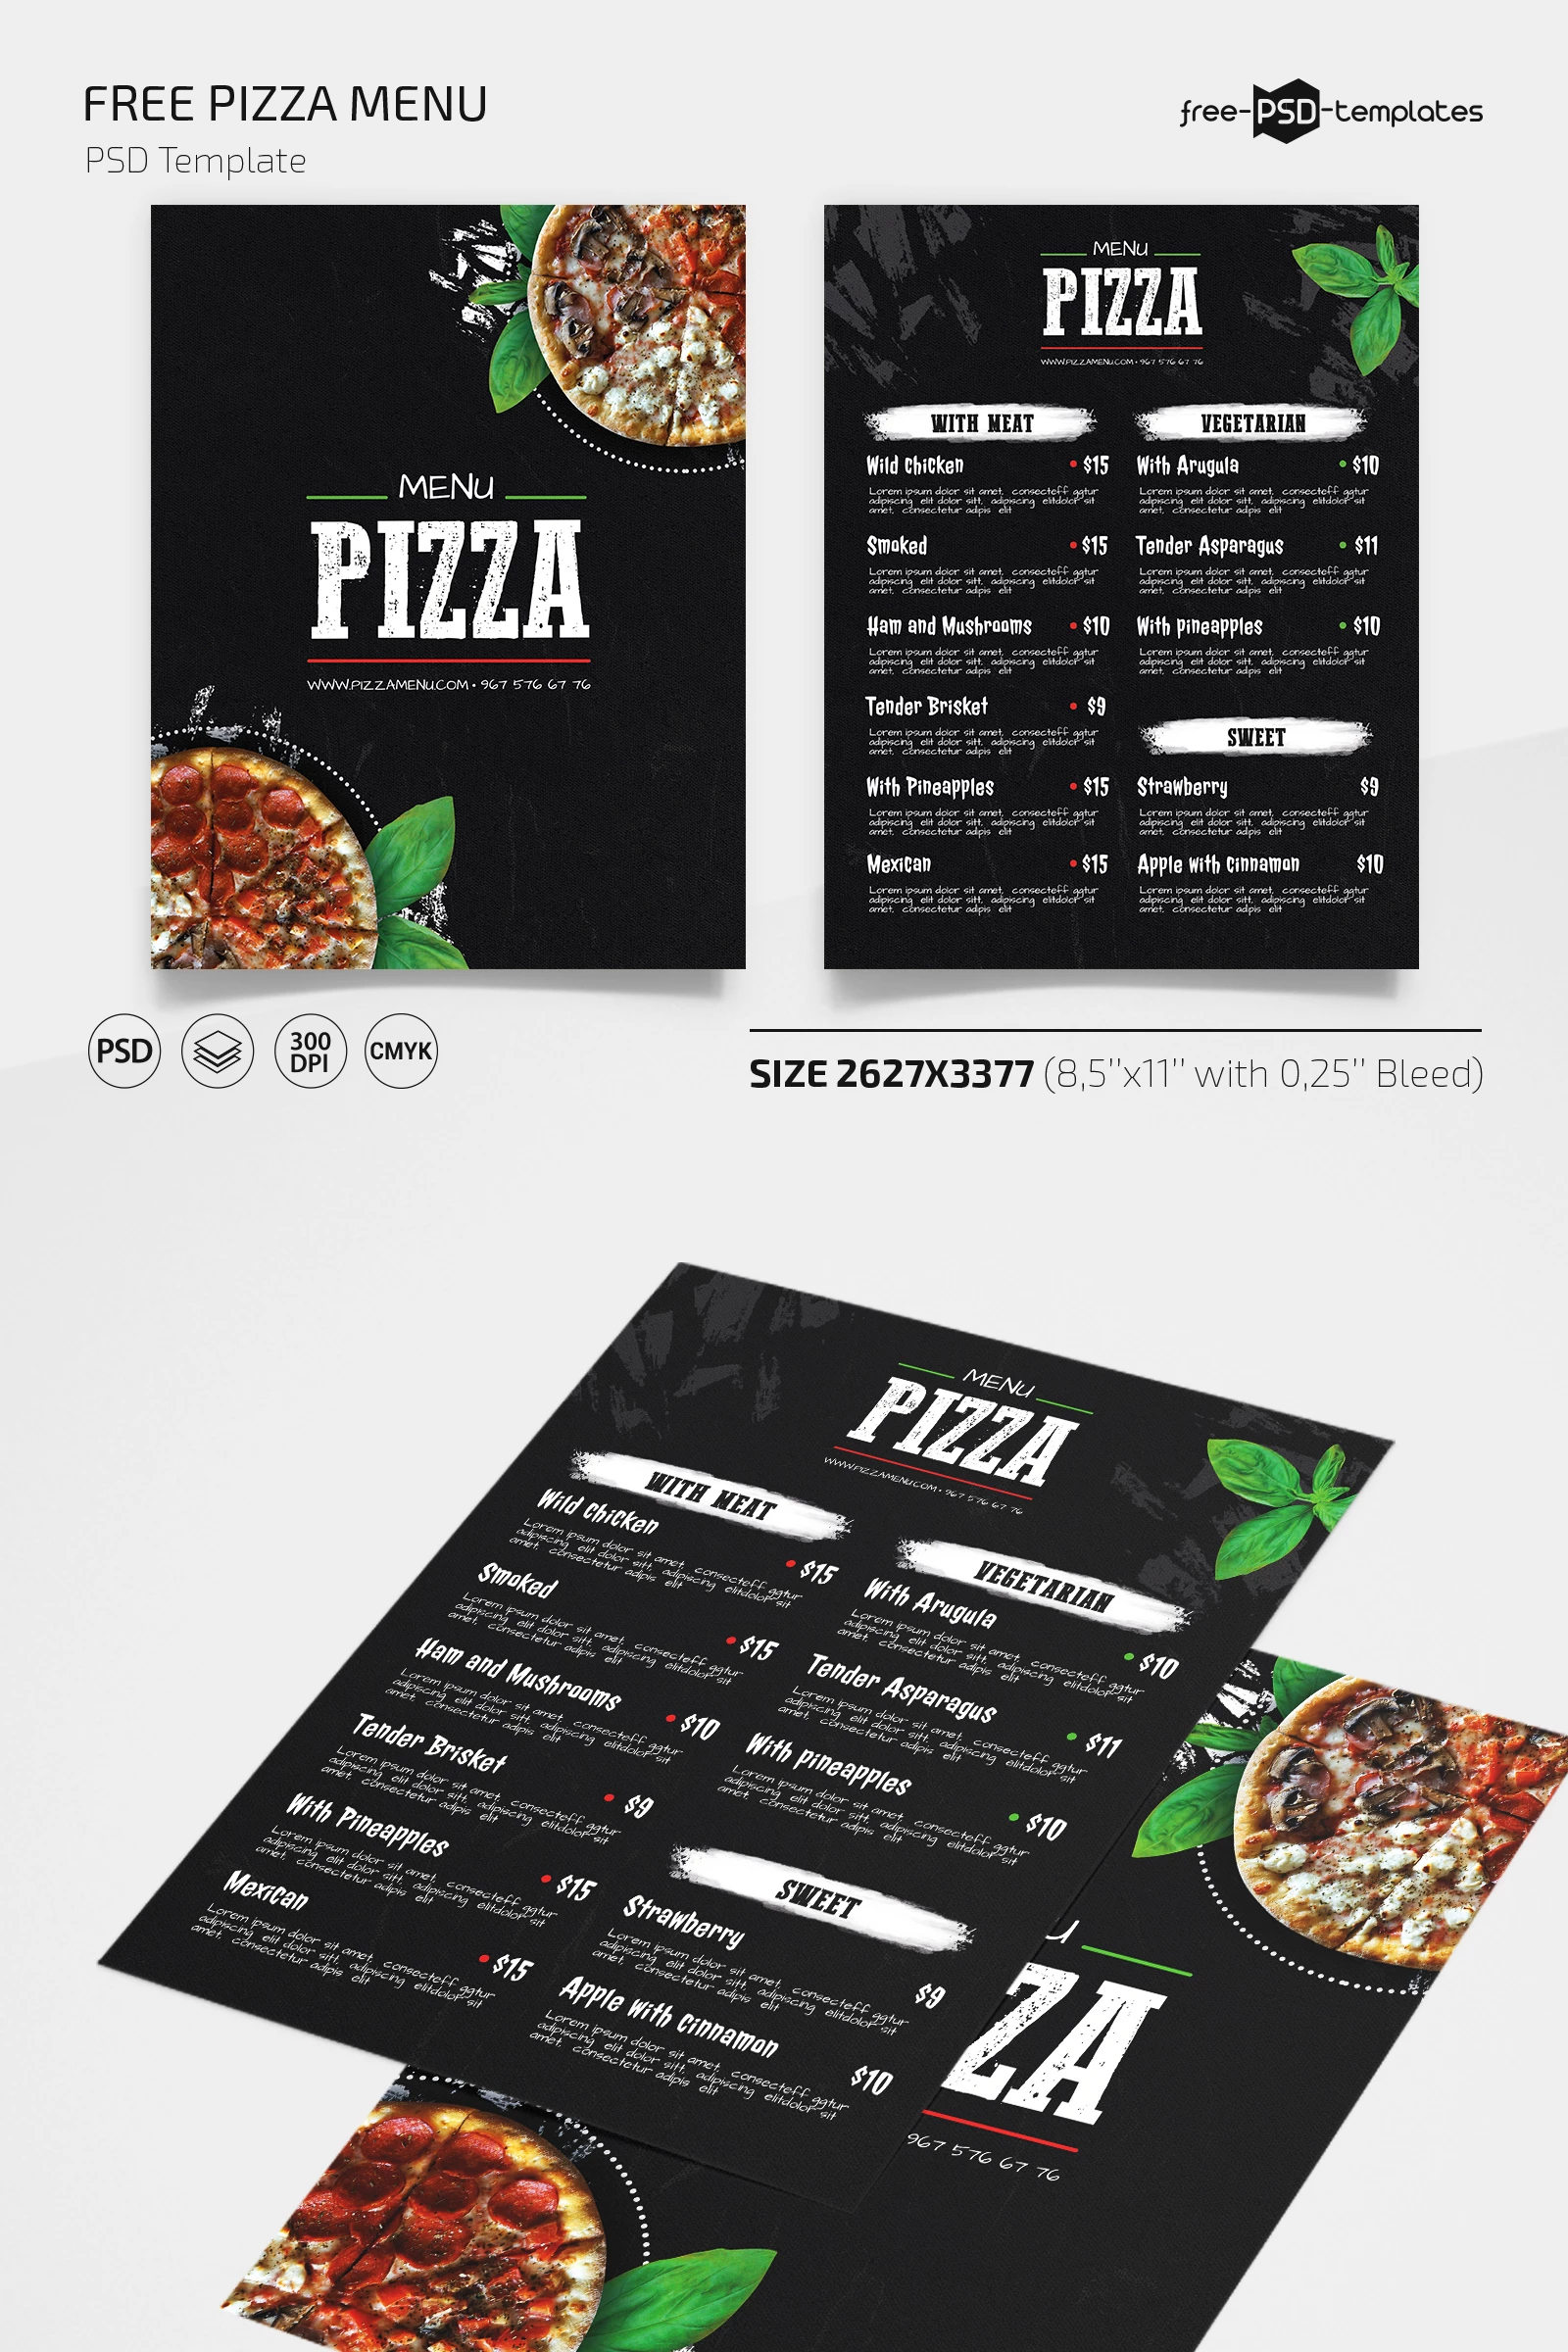 Free Pizza Menu Template for Photoshop